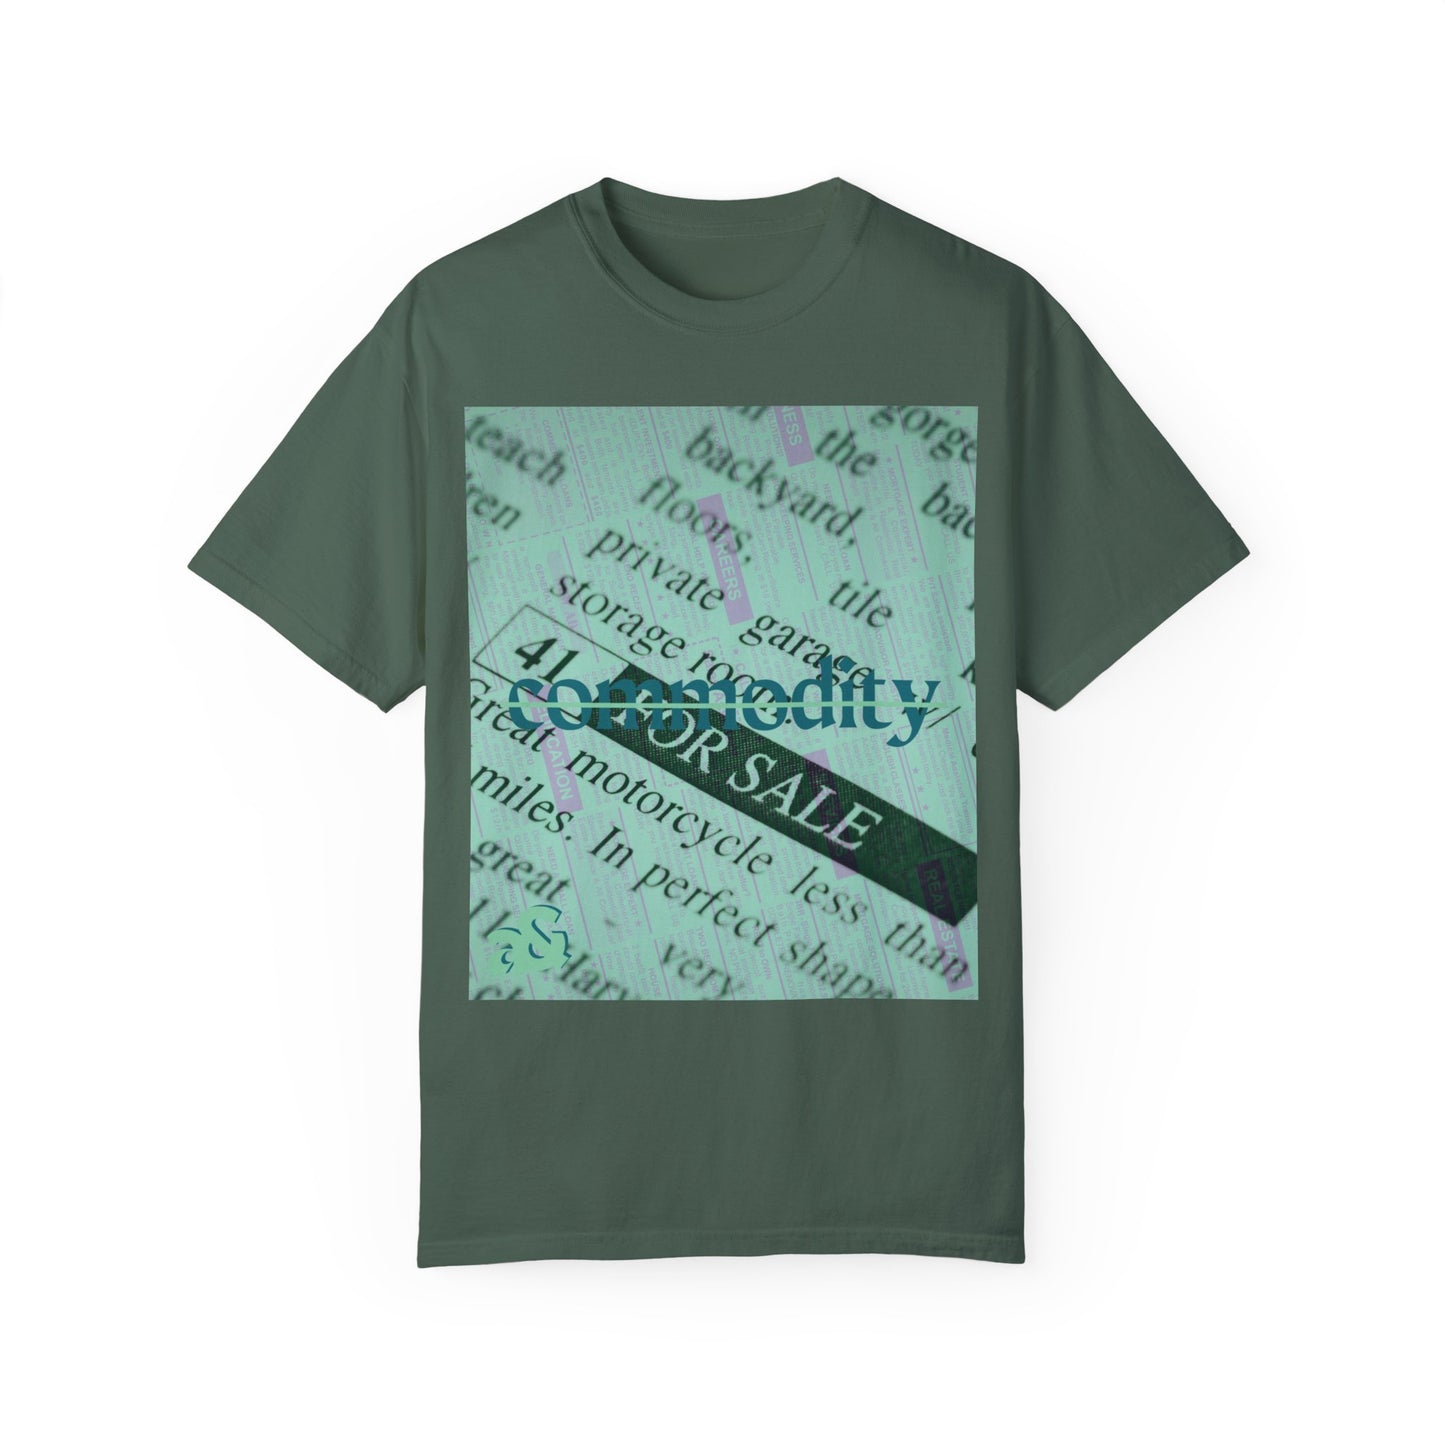 Not Your Commodity T-shirt